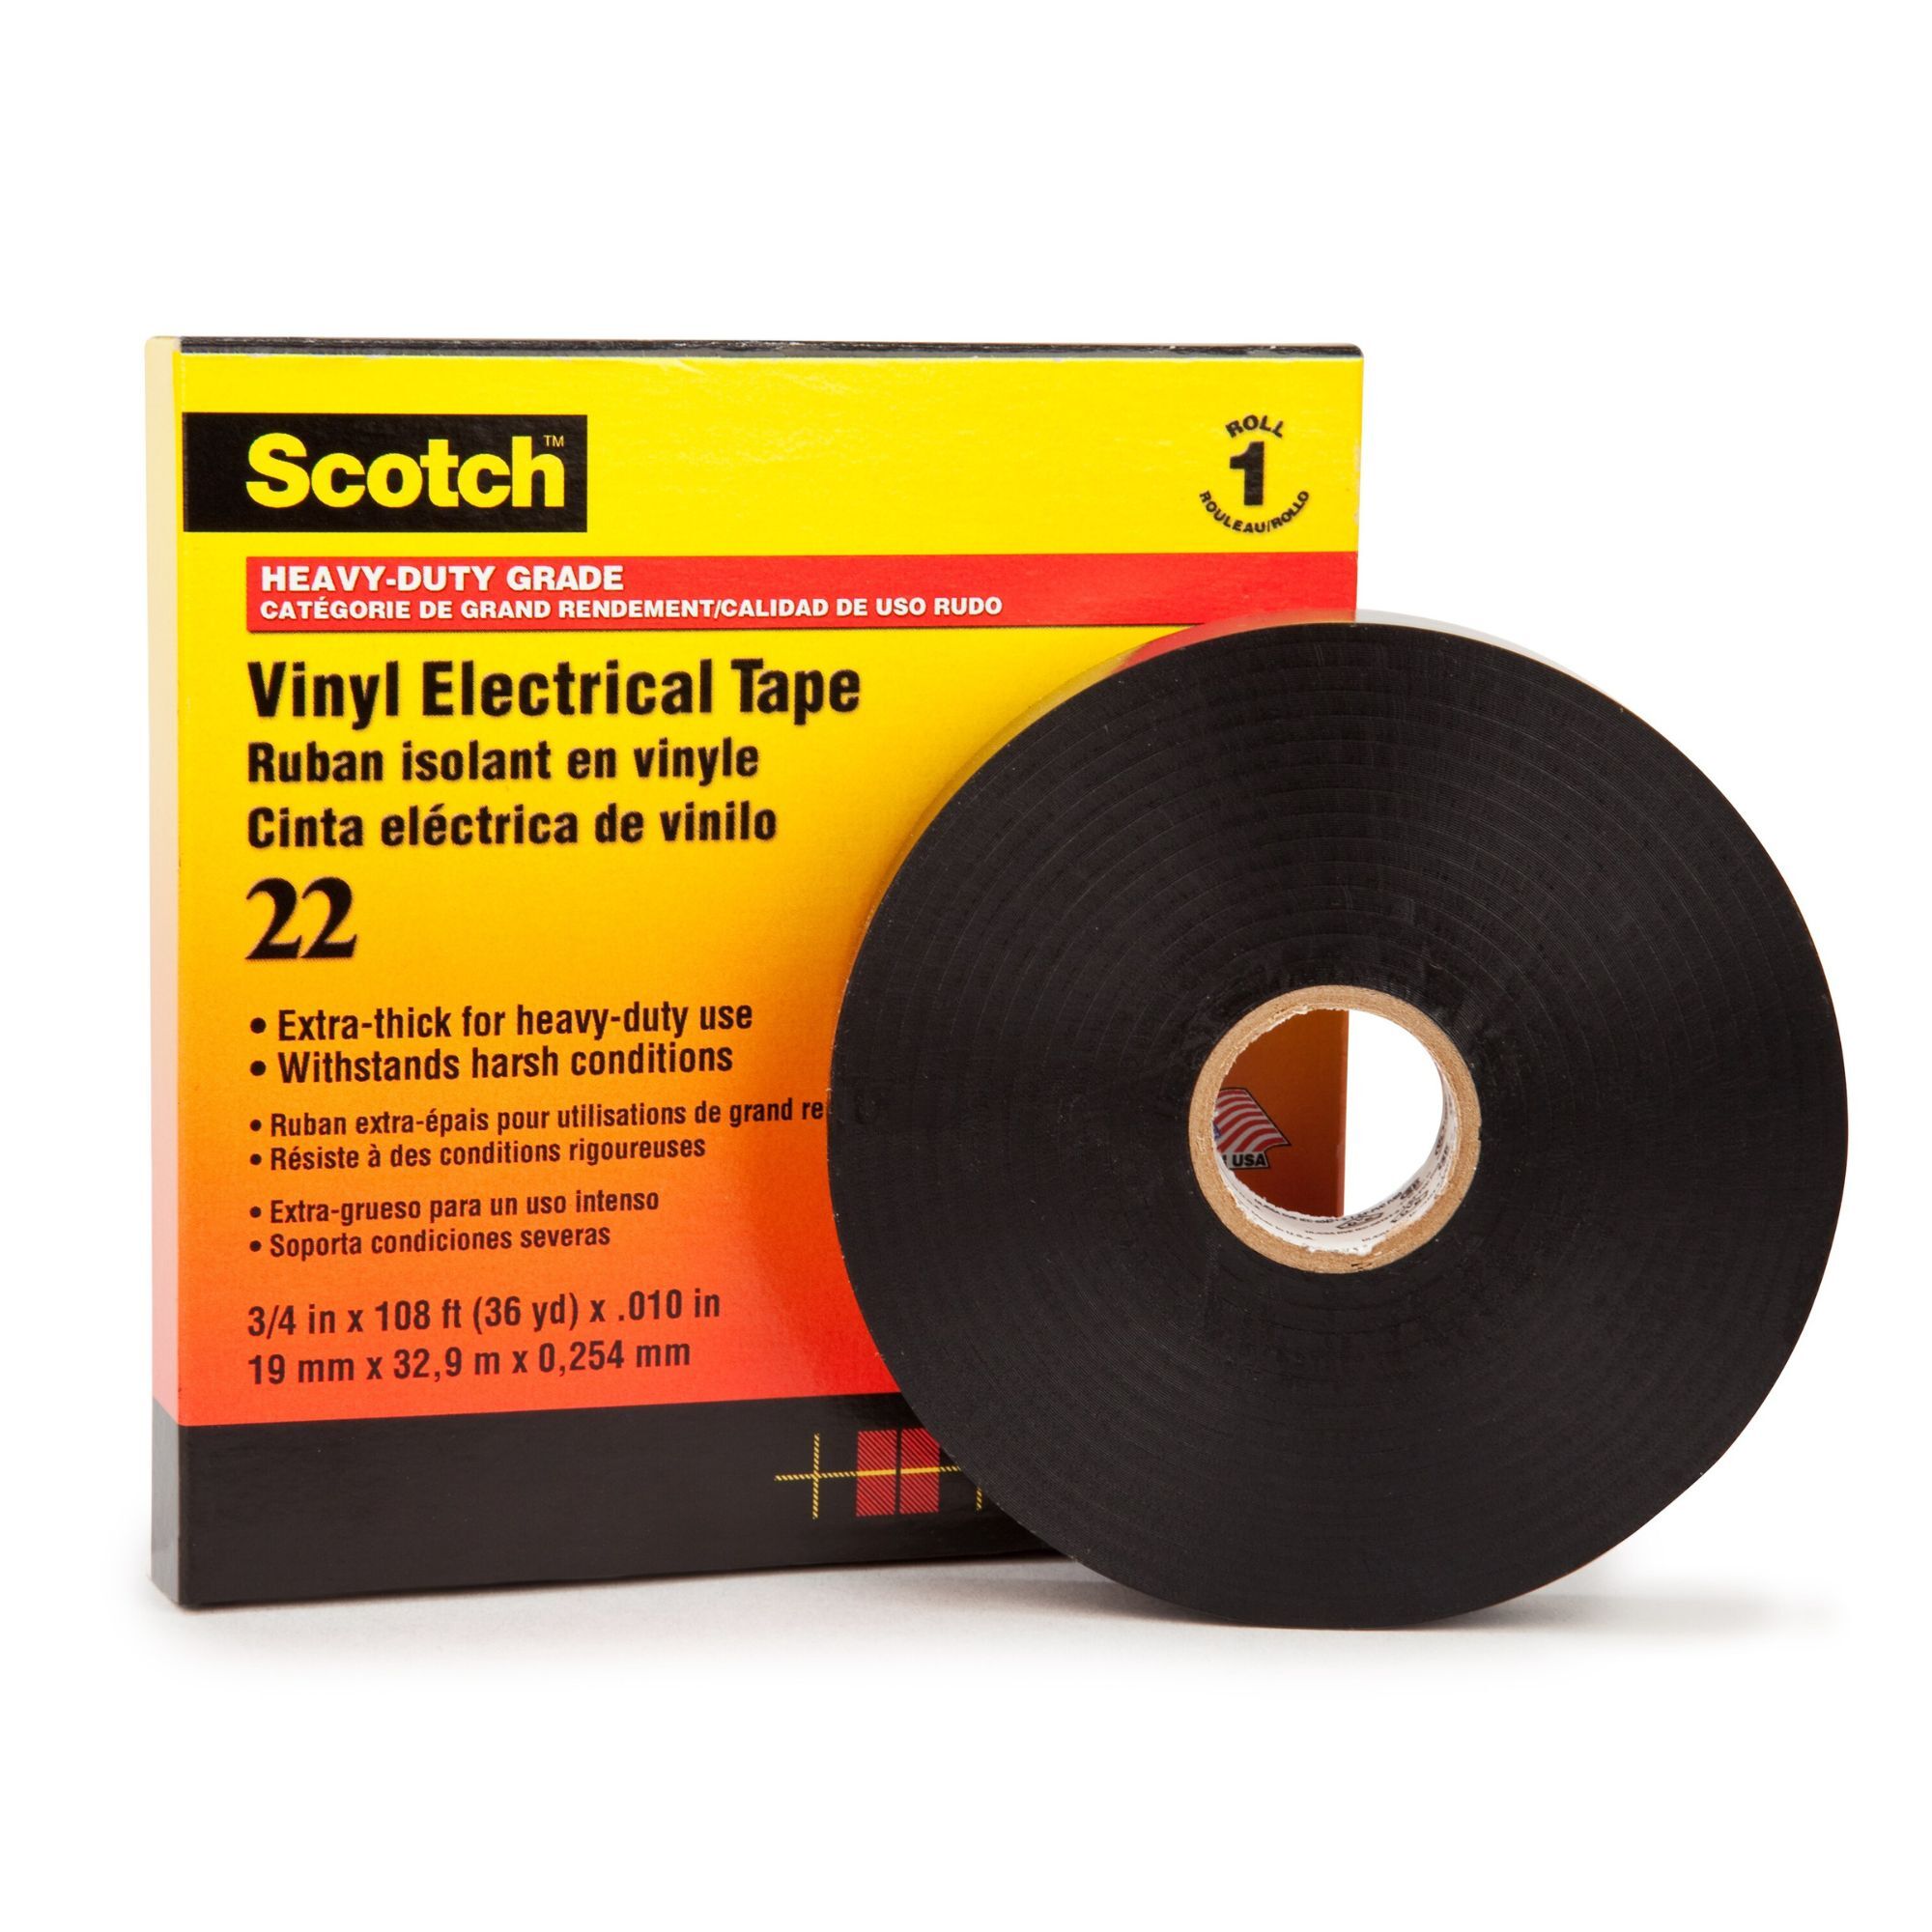 Scotch Heavy-Duty Grade Extra Thick Electrical Tape (22)